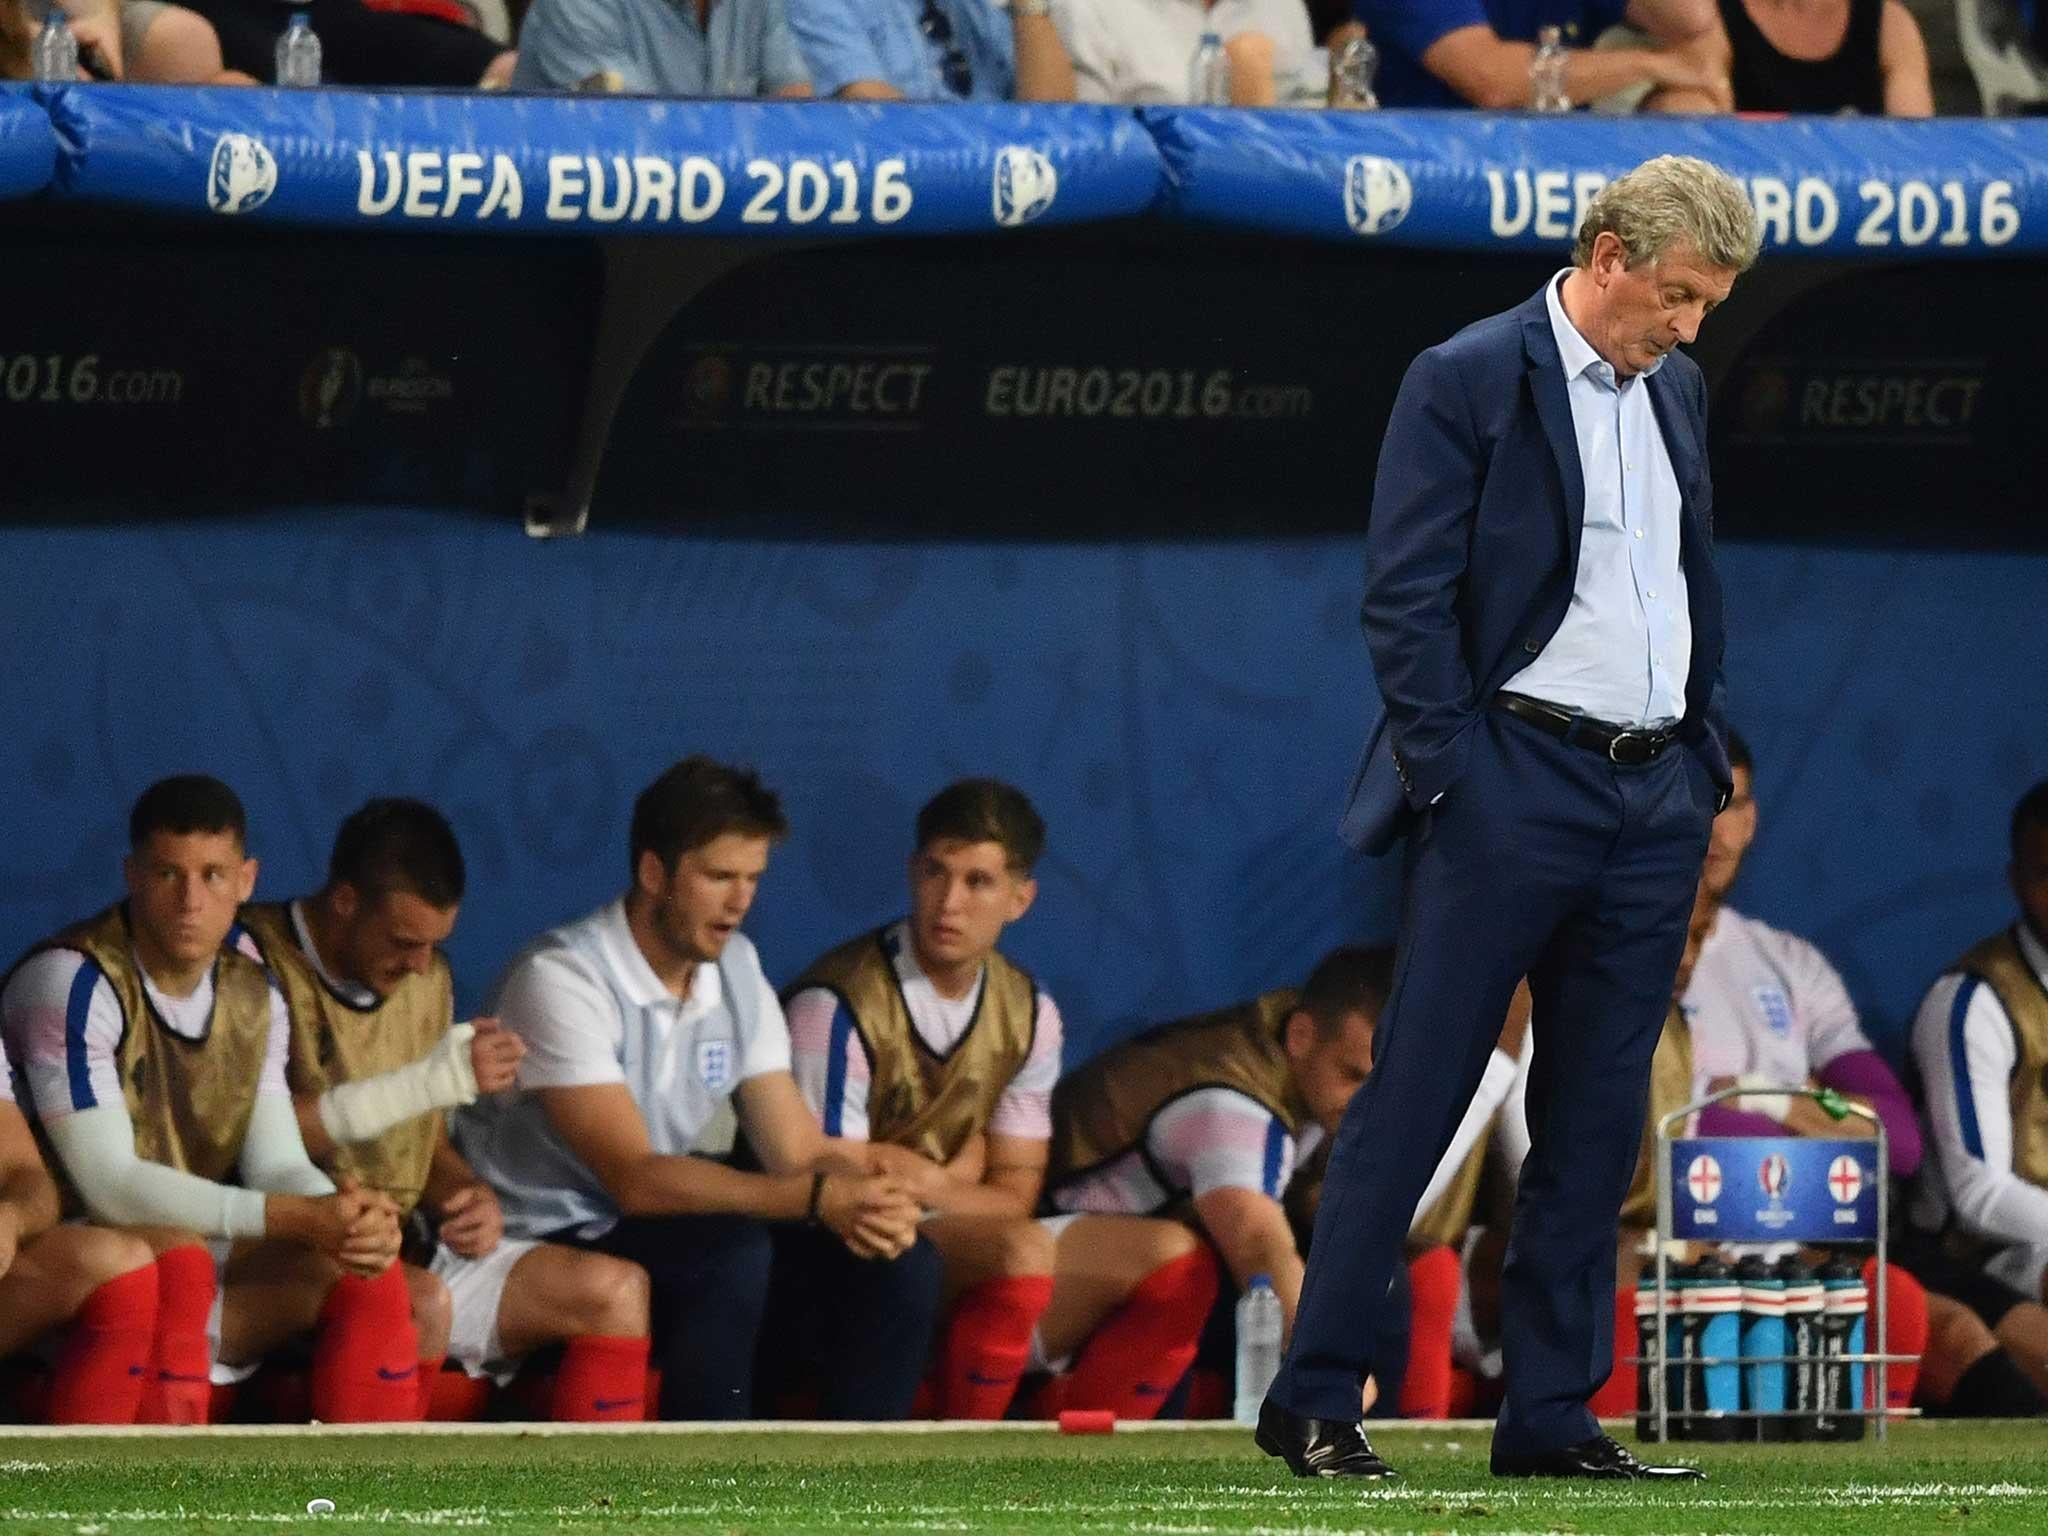 Roy Hodgson was helpless to prevent England's early exit